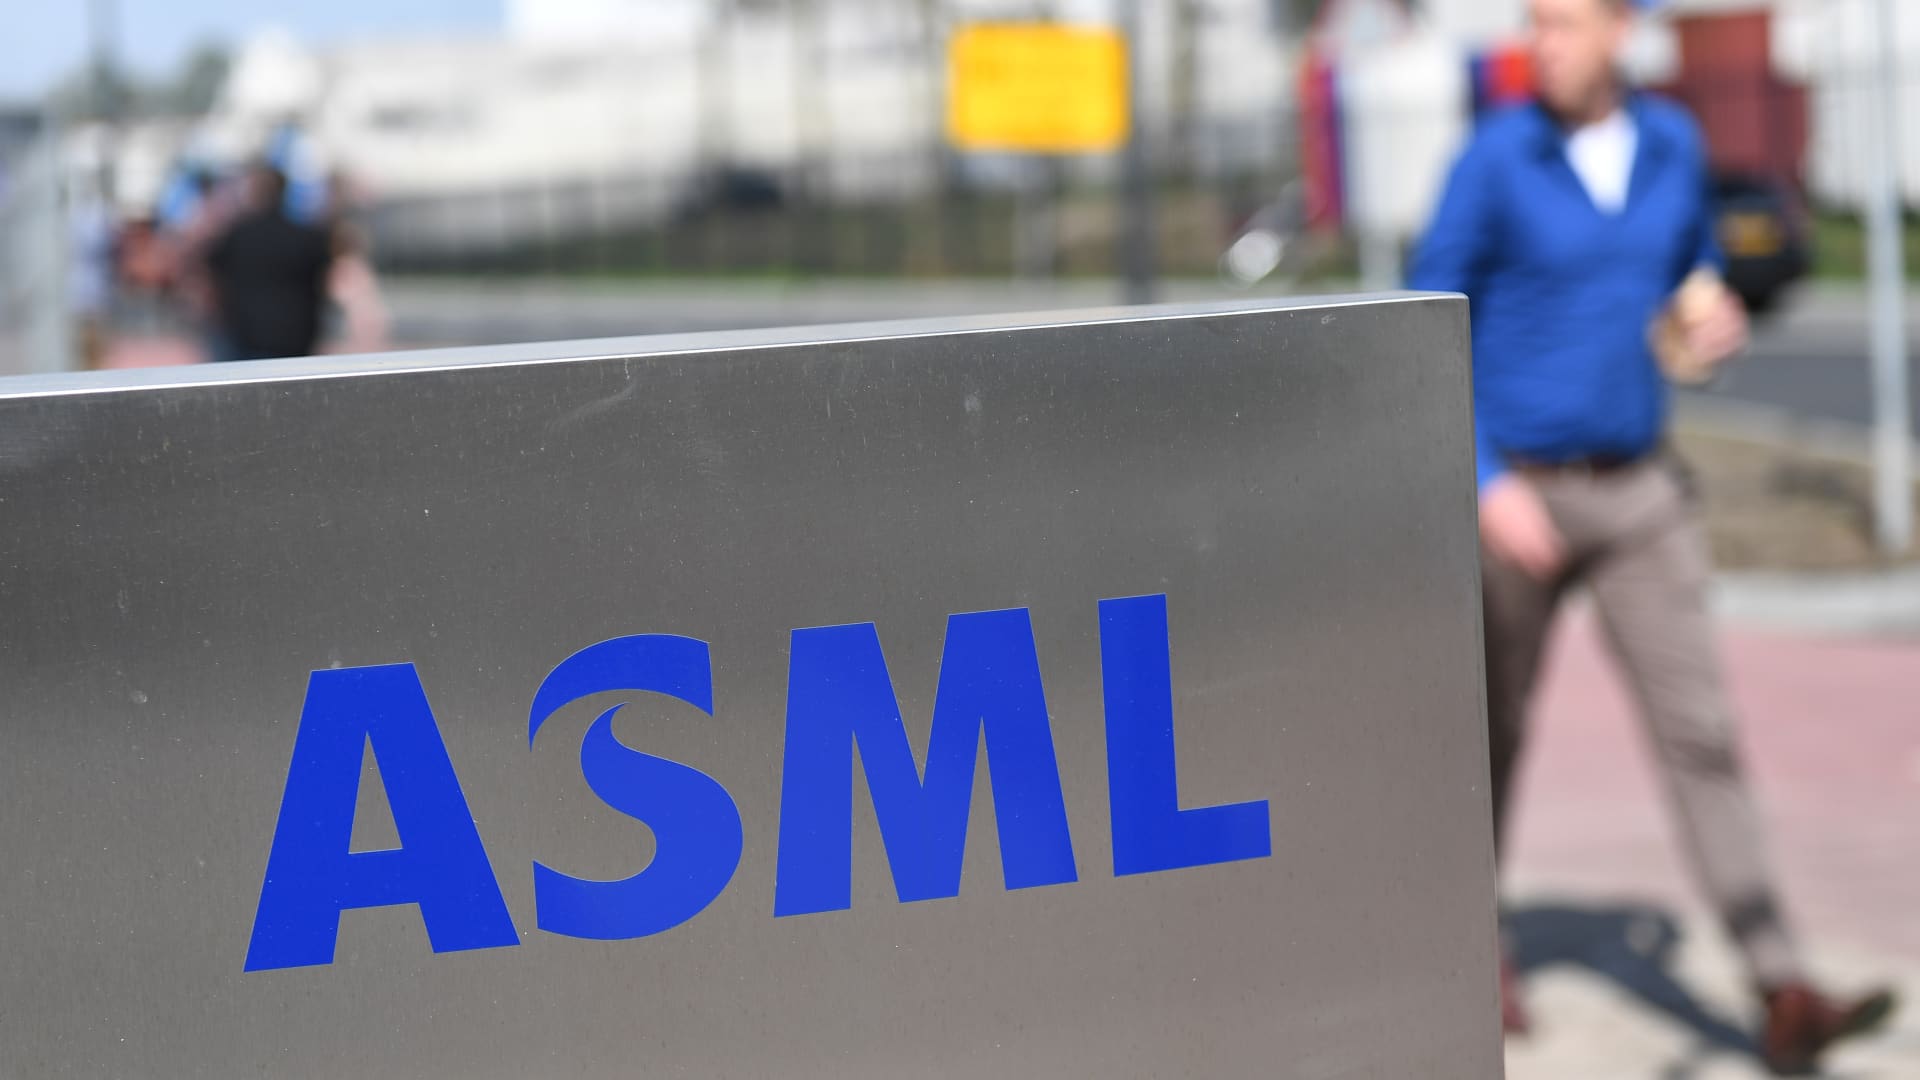 Critical chip firm ASML, caught in China export restrictions, posts 38% rise in profit